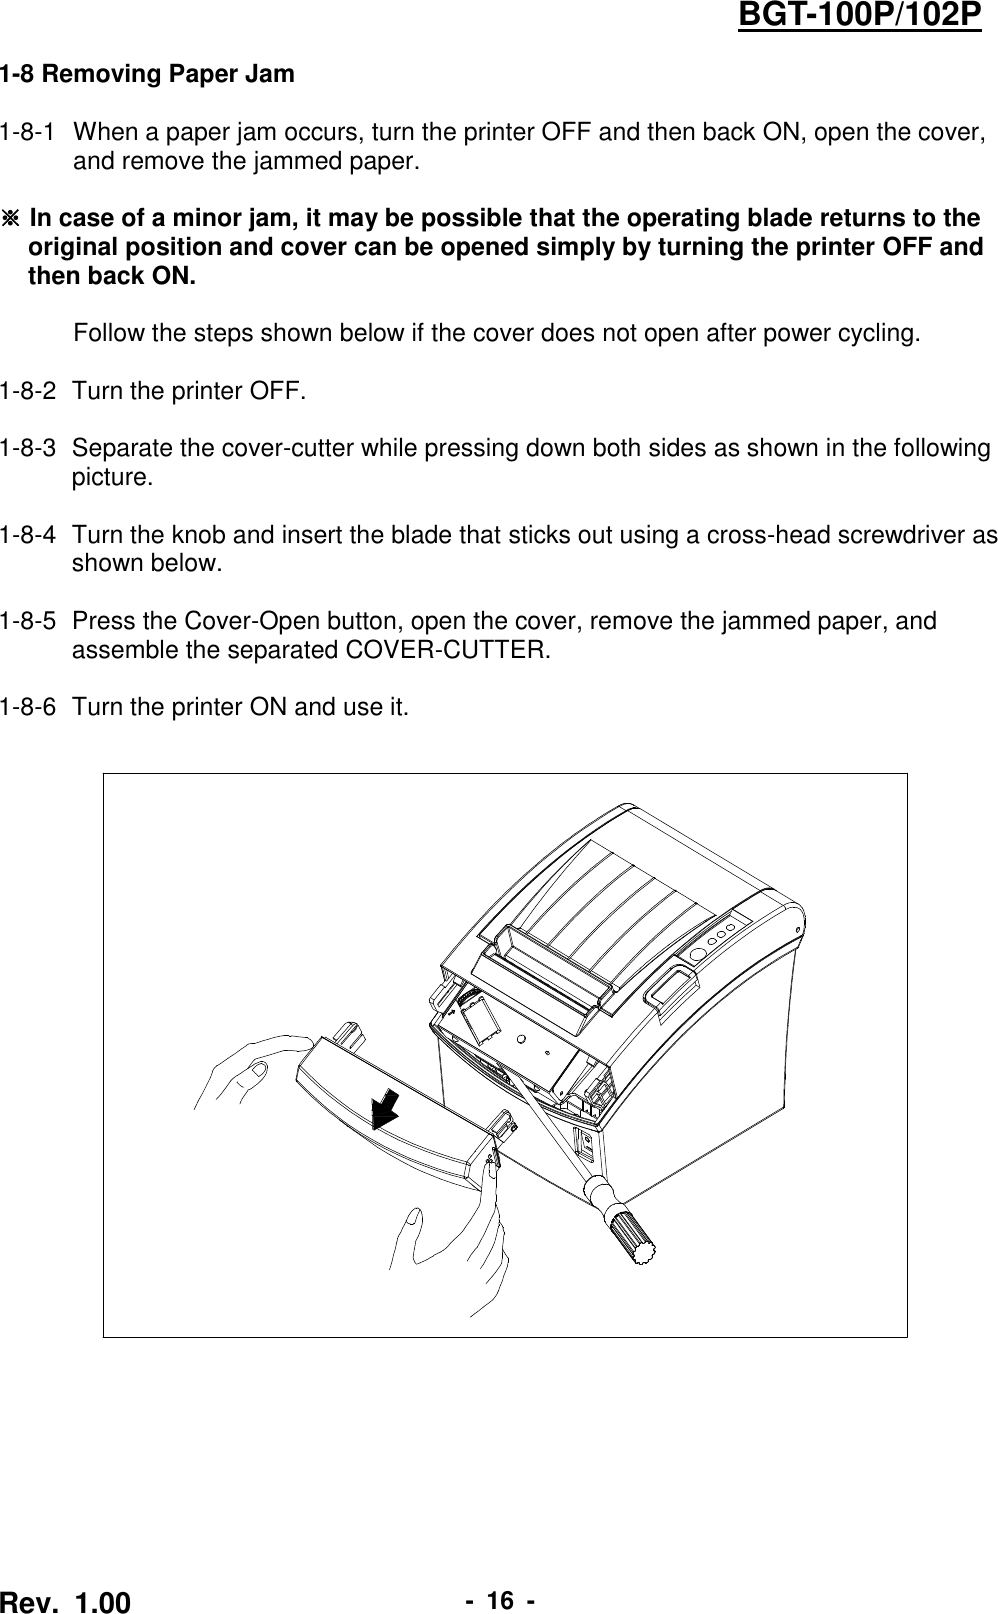  Rev.  1.00 -  16  - BGT-100P/102P 1-8 Removing Paper Jam  1-8-1   When a paper jam occurs, turn the printer OFF and then back ON, open the cover, and remove the jammed paper.  ※ In case of a minor jam, it may be possible that the operating blade returns to the original position and cover can be opened simply by turning the printer OFF and then back ON.  Follow the steps shown below if the cover does not open after power cycling.  1-8-2  Turn the printer OFF.  1-8-3   Separate the cover-cutter while pressing down both sides as shown in the following picture.  1-8-4   Turn the knob and insert the blade that sticks out using a cross-head screwdriver as shown below.  1-8-5   Press the Cover-Open button, open the cover, remove the jammed paper, and assemble the separated COVER-CUTTER.  1-8-6   Turn the printer ON and use it.   